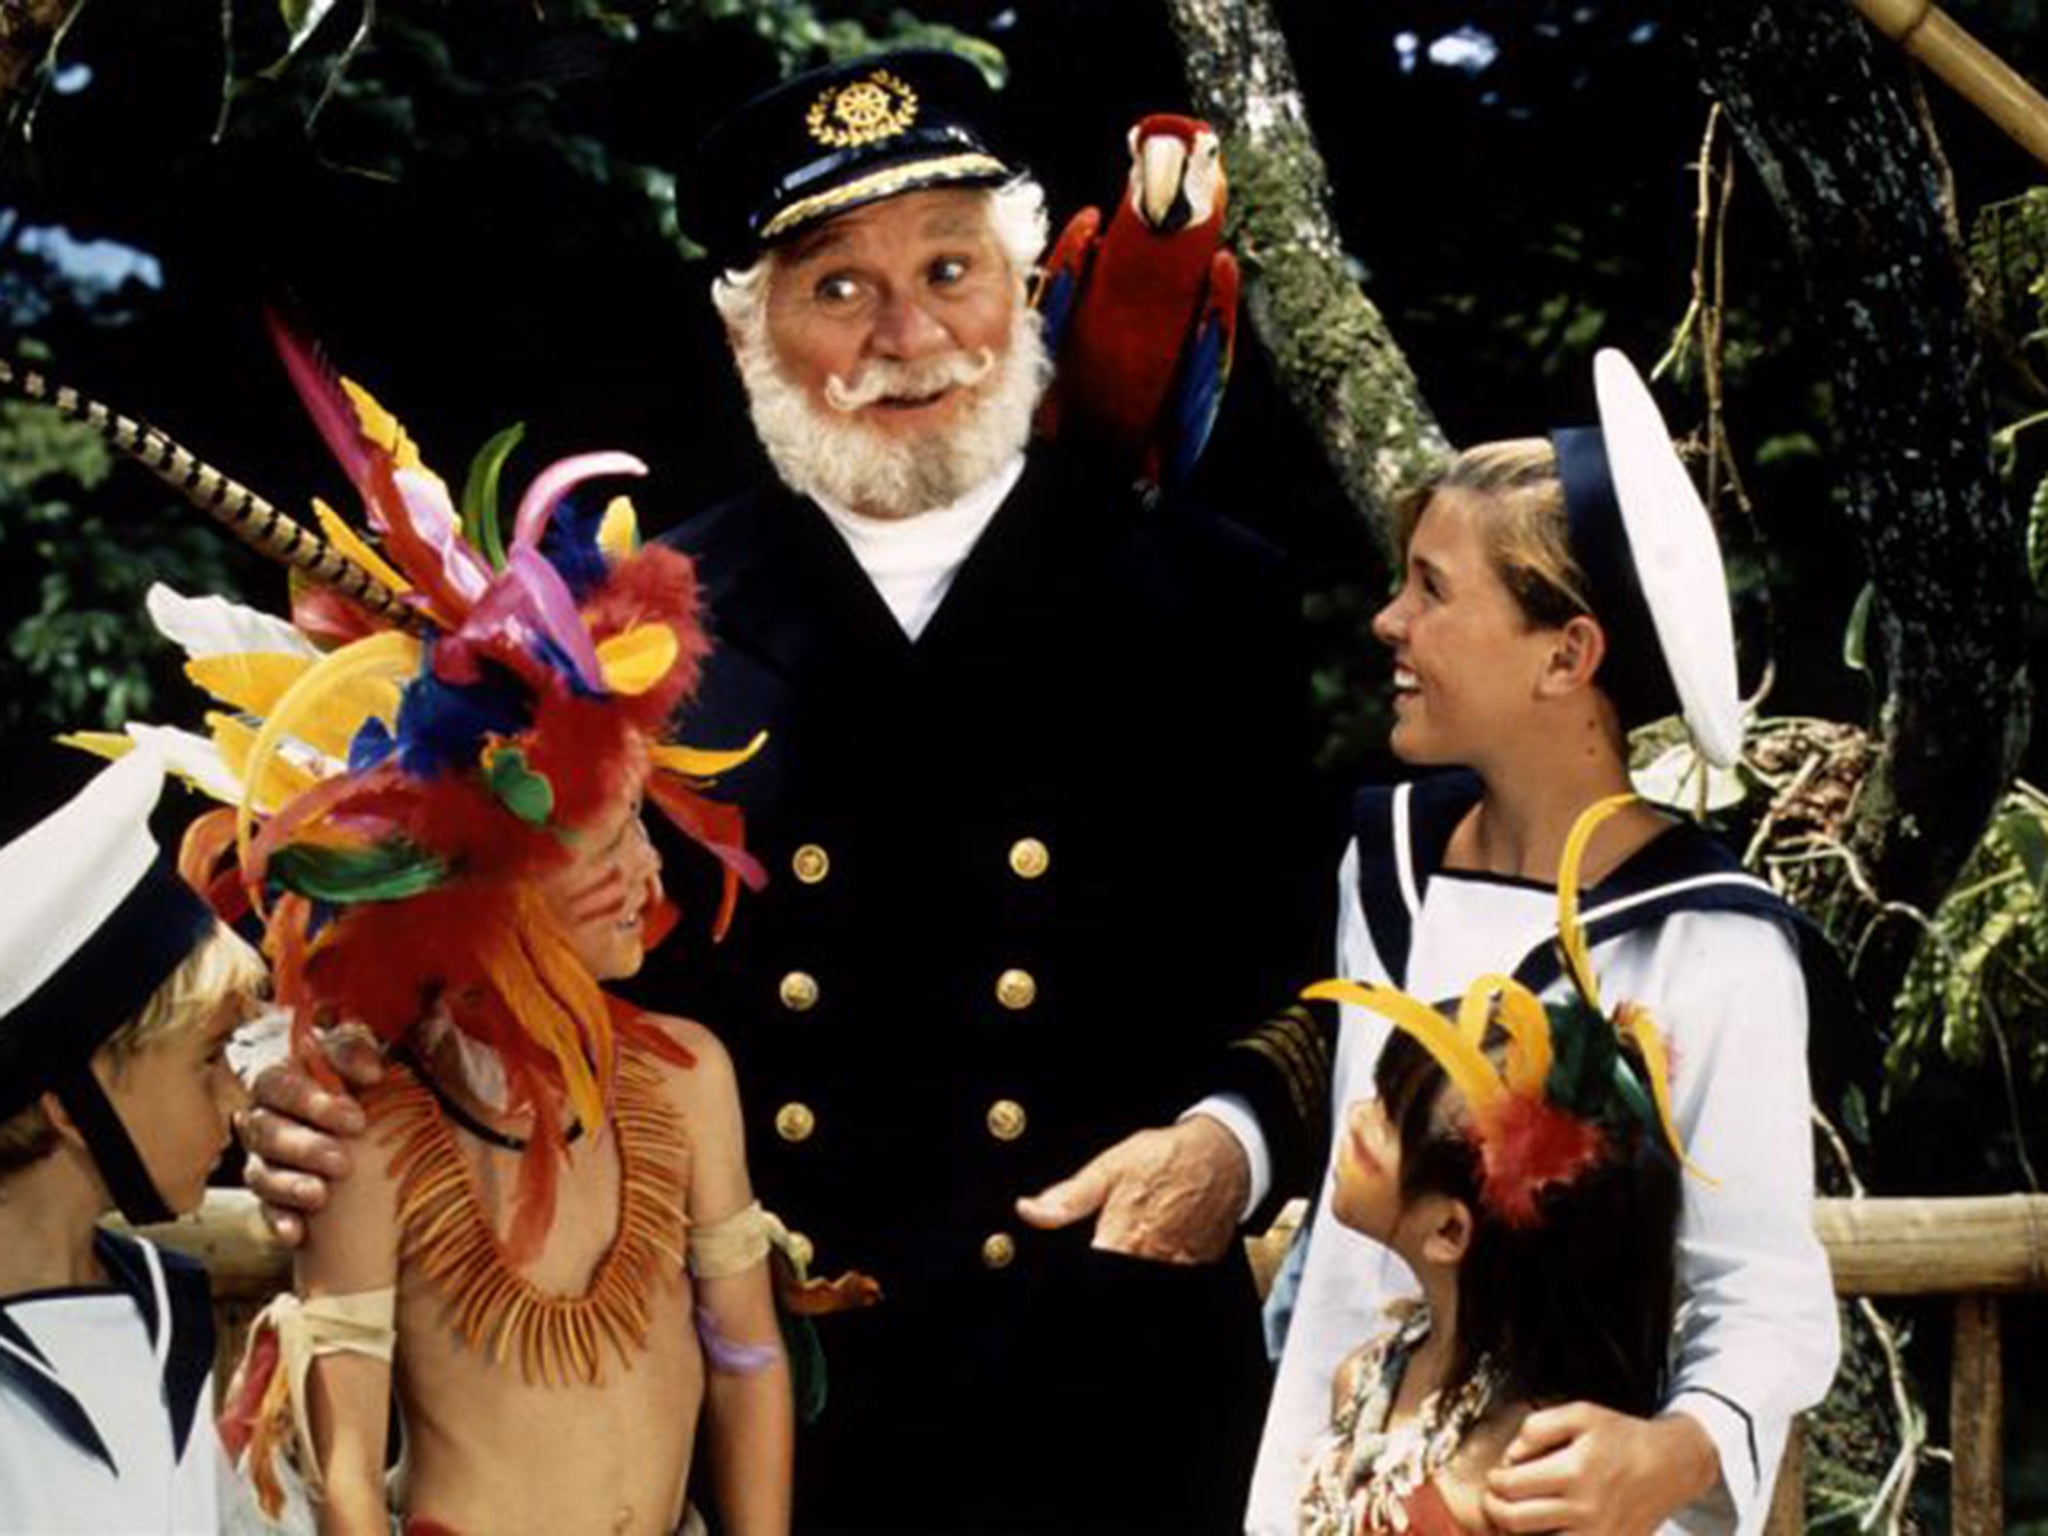 Captain Birdseye was introduced in 1967 and played by John Hewer, who wasn’t perhaps quite as sexy as the new choice for the role